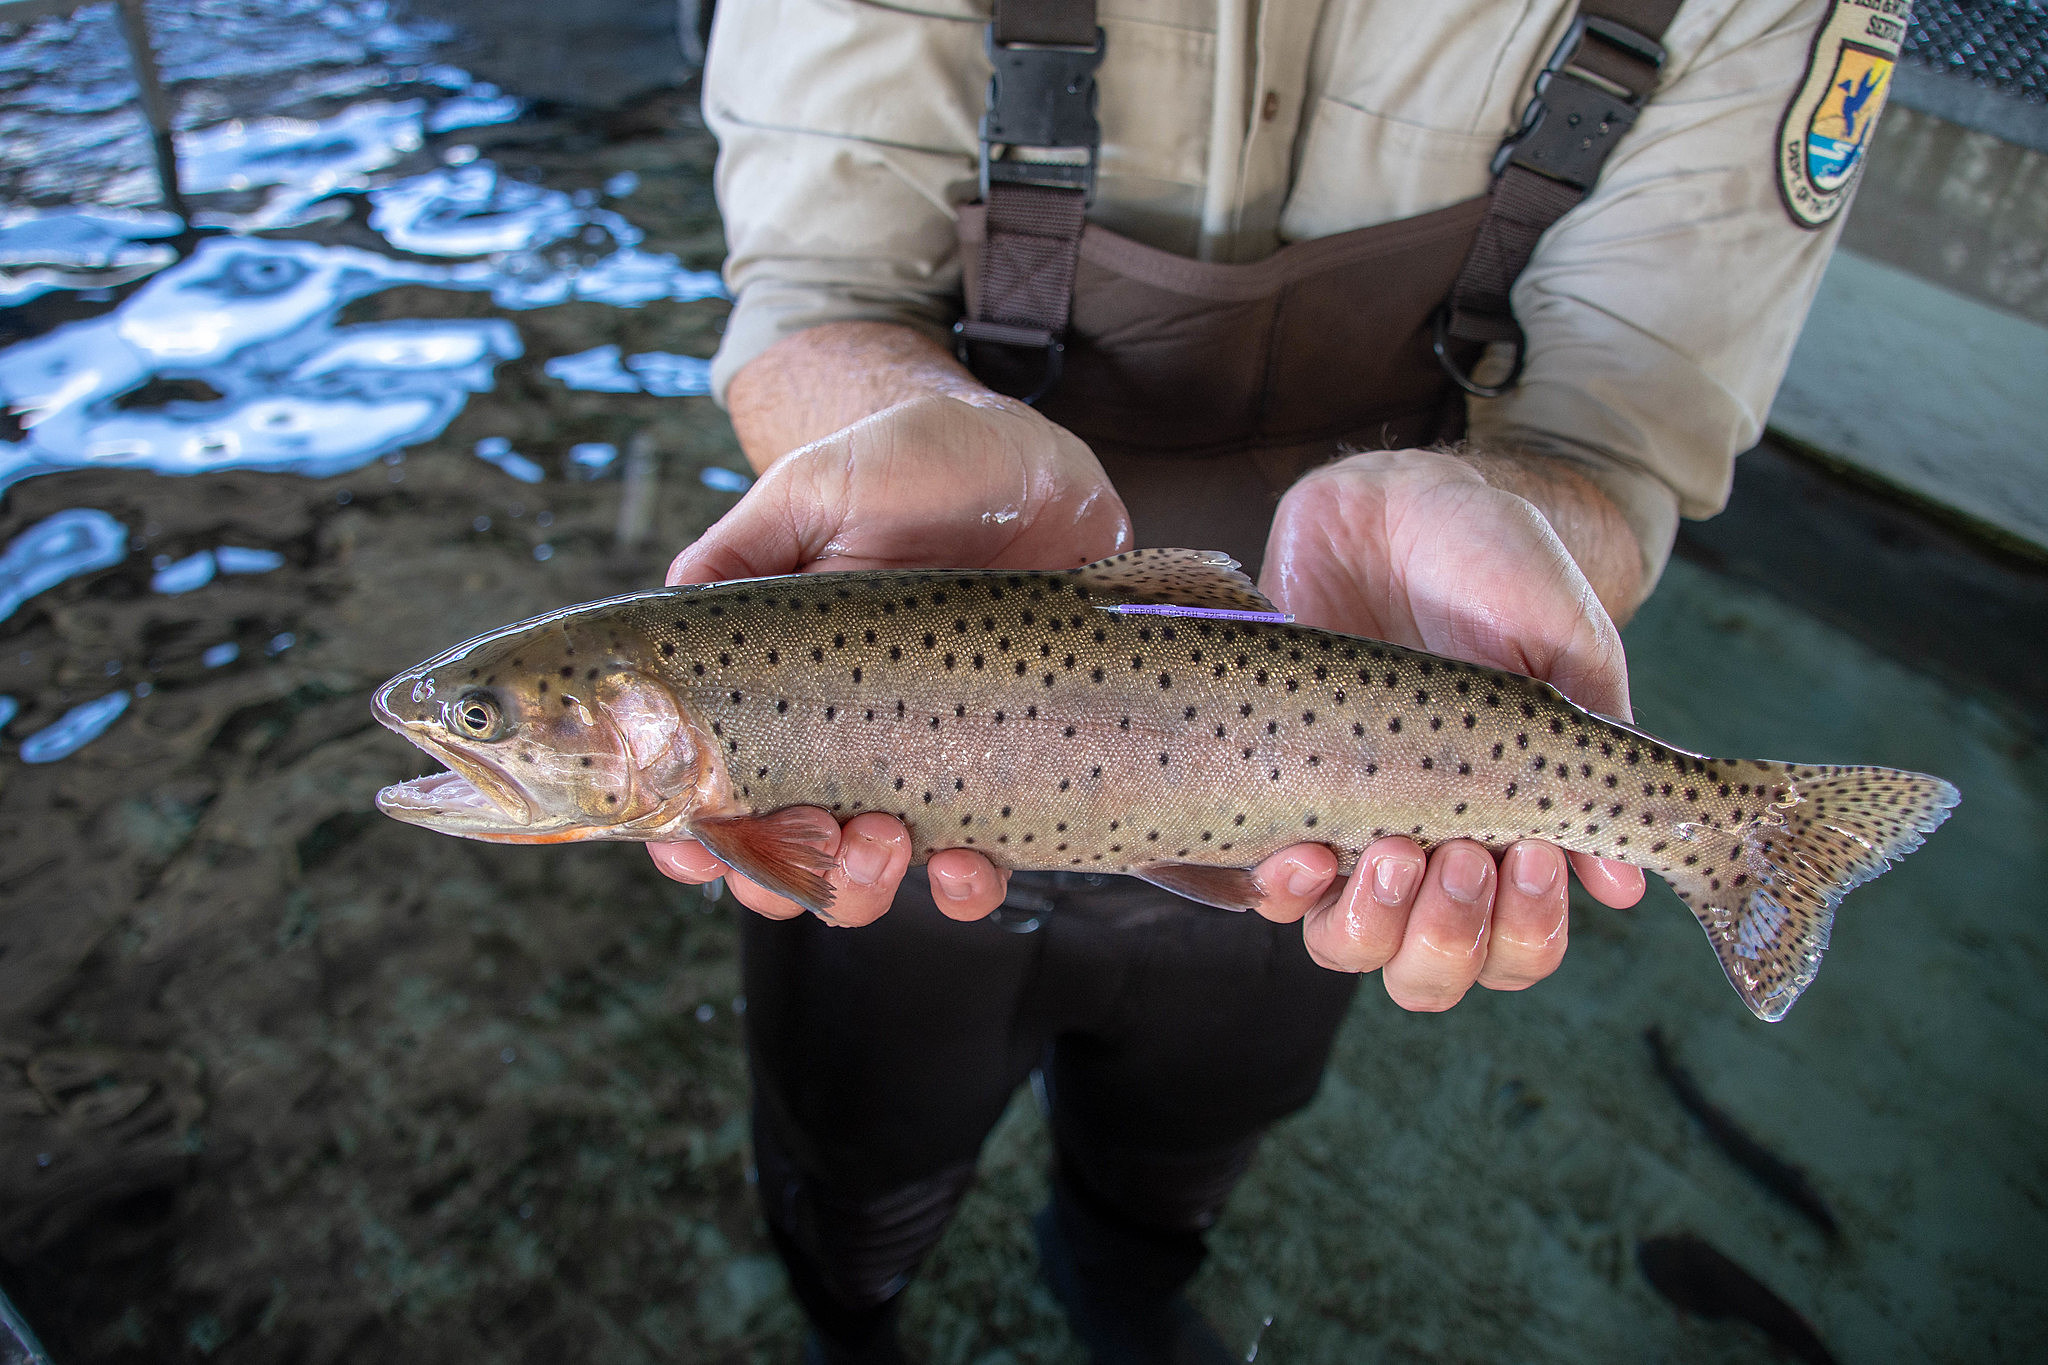 Nevada tribes saving Lahontan cutthroat trout from extinction